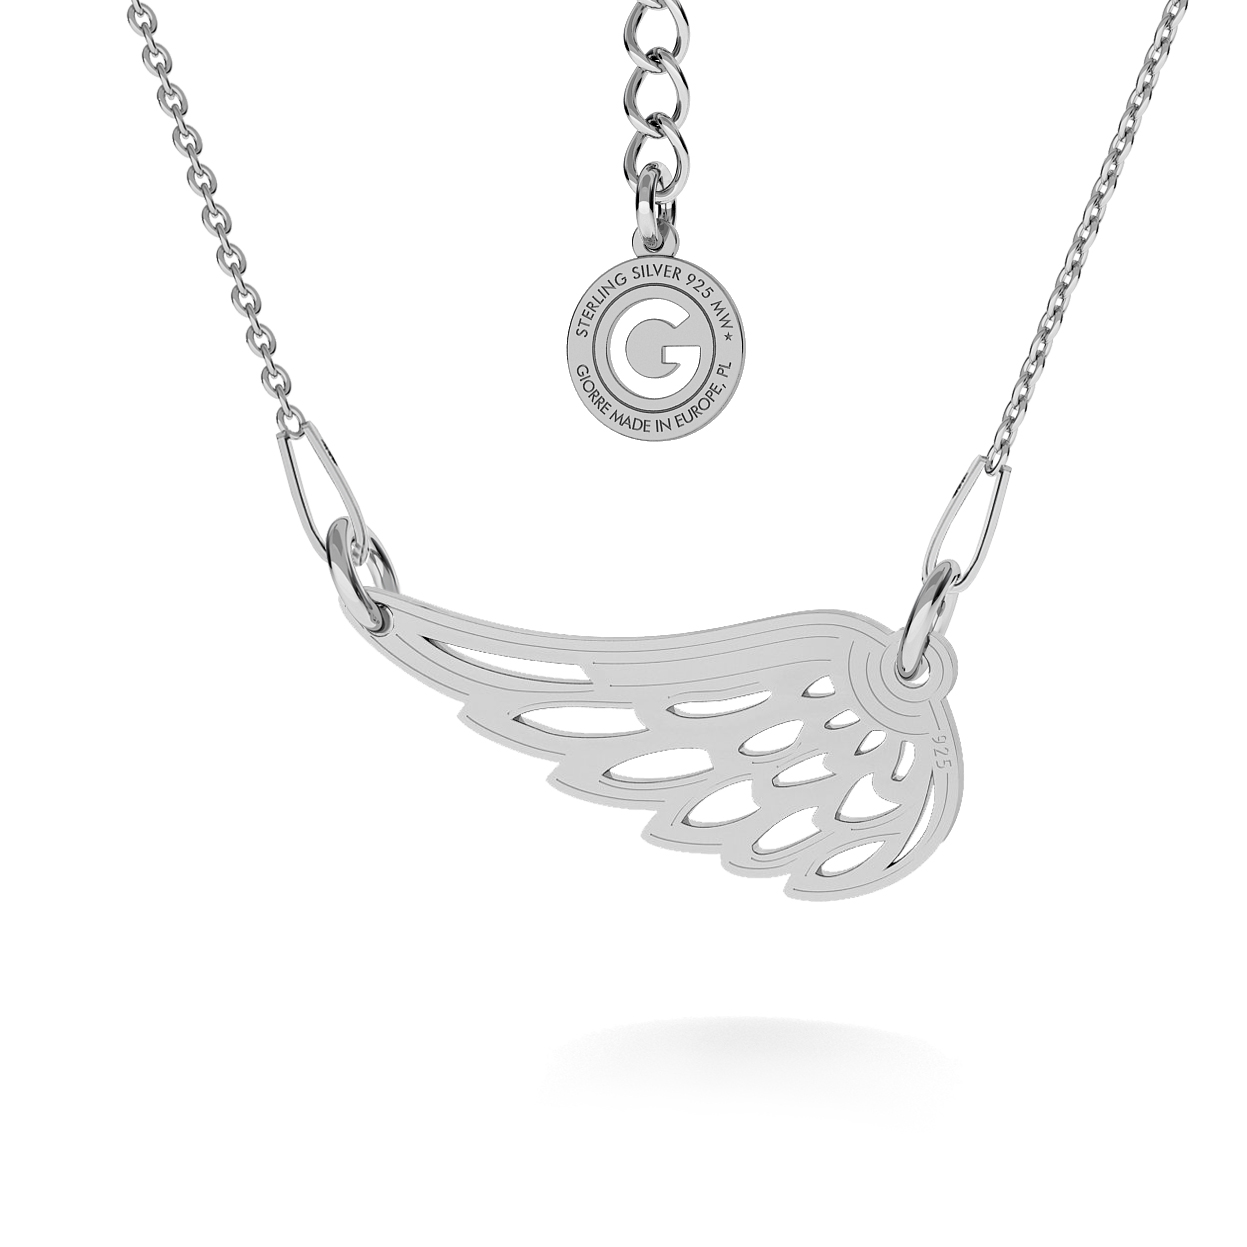 SILVER SISTER NECKLACE, STERLING SILVER 925